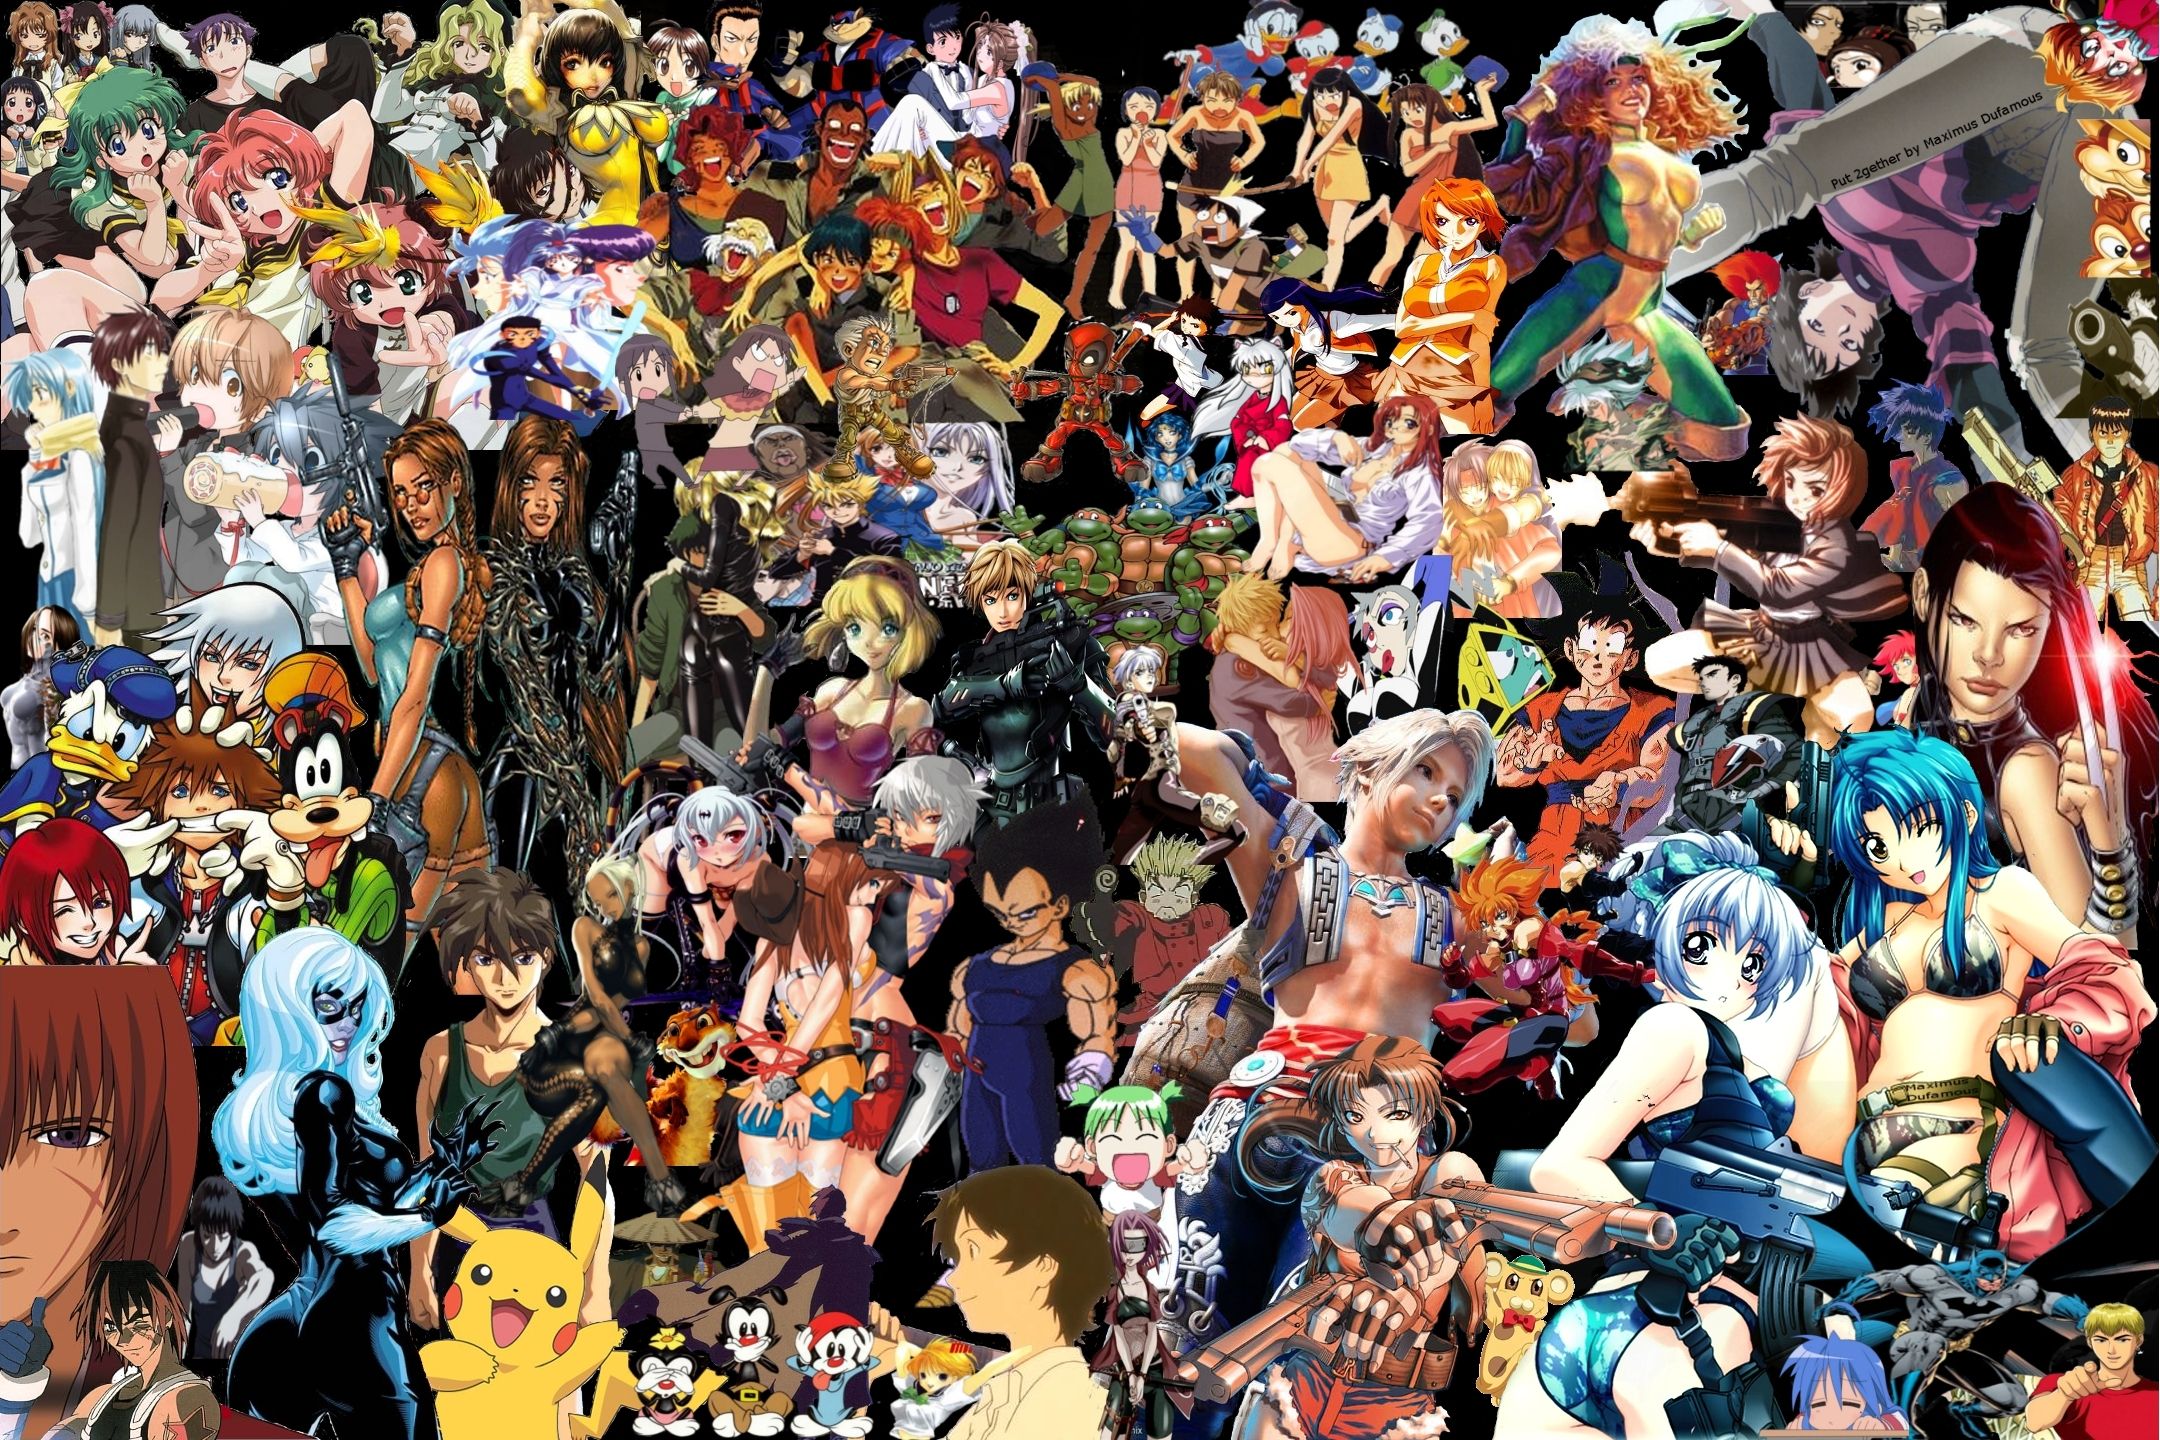 Anime Collage Wallpaper Free Download 14302 - HD Wallpapers Site